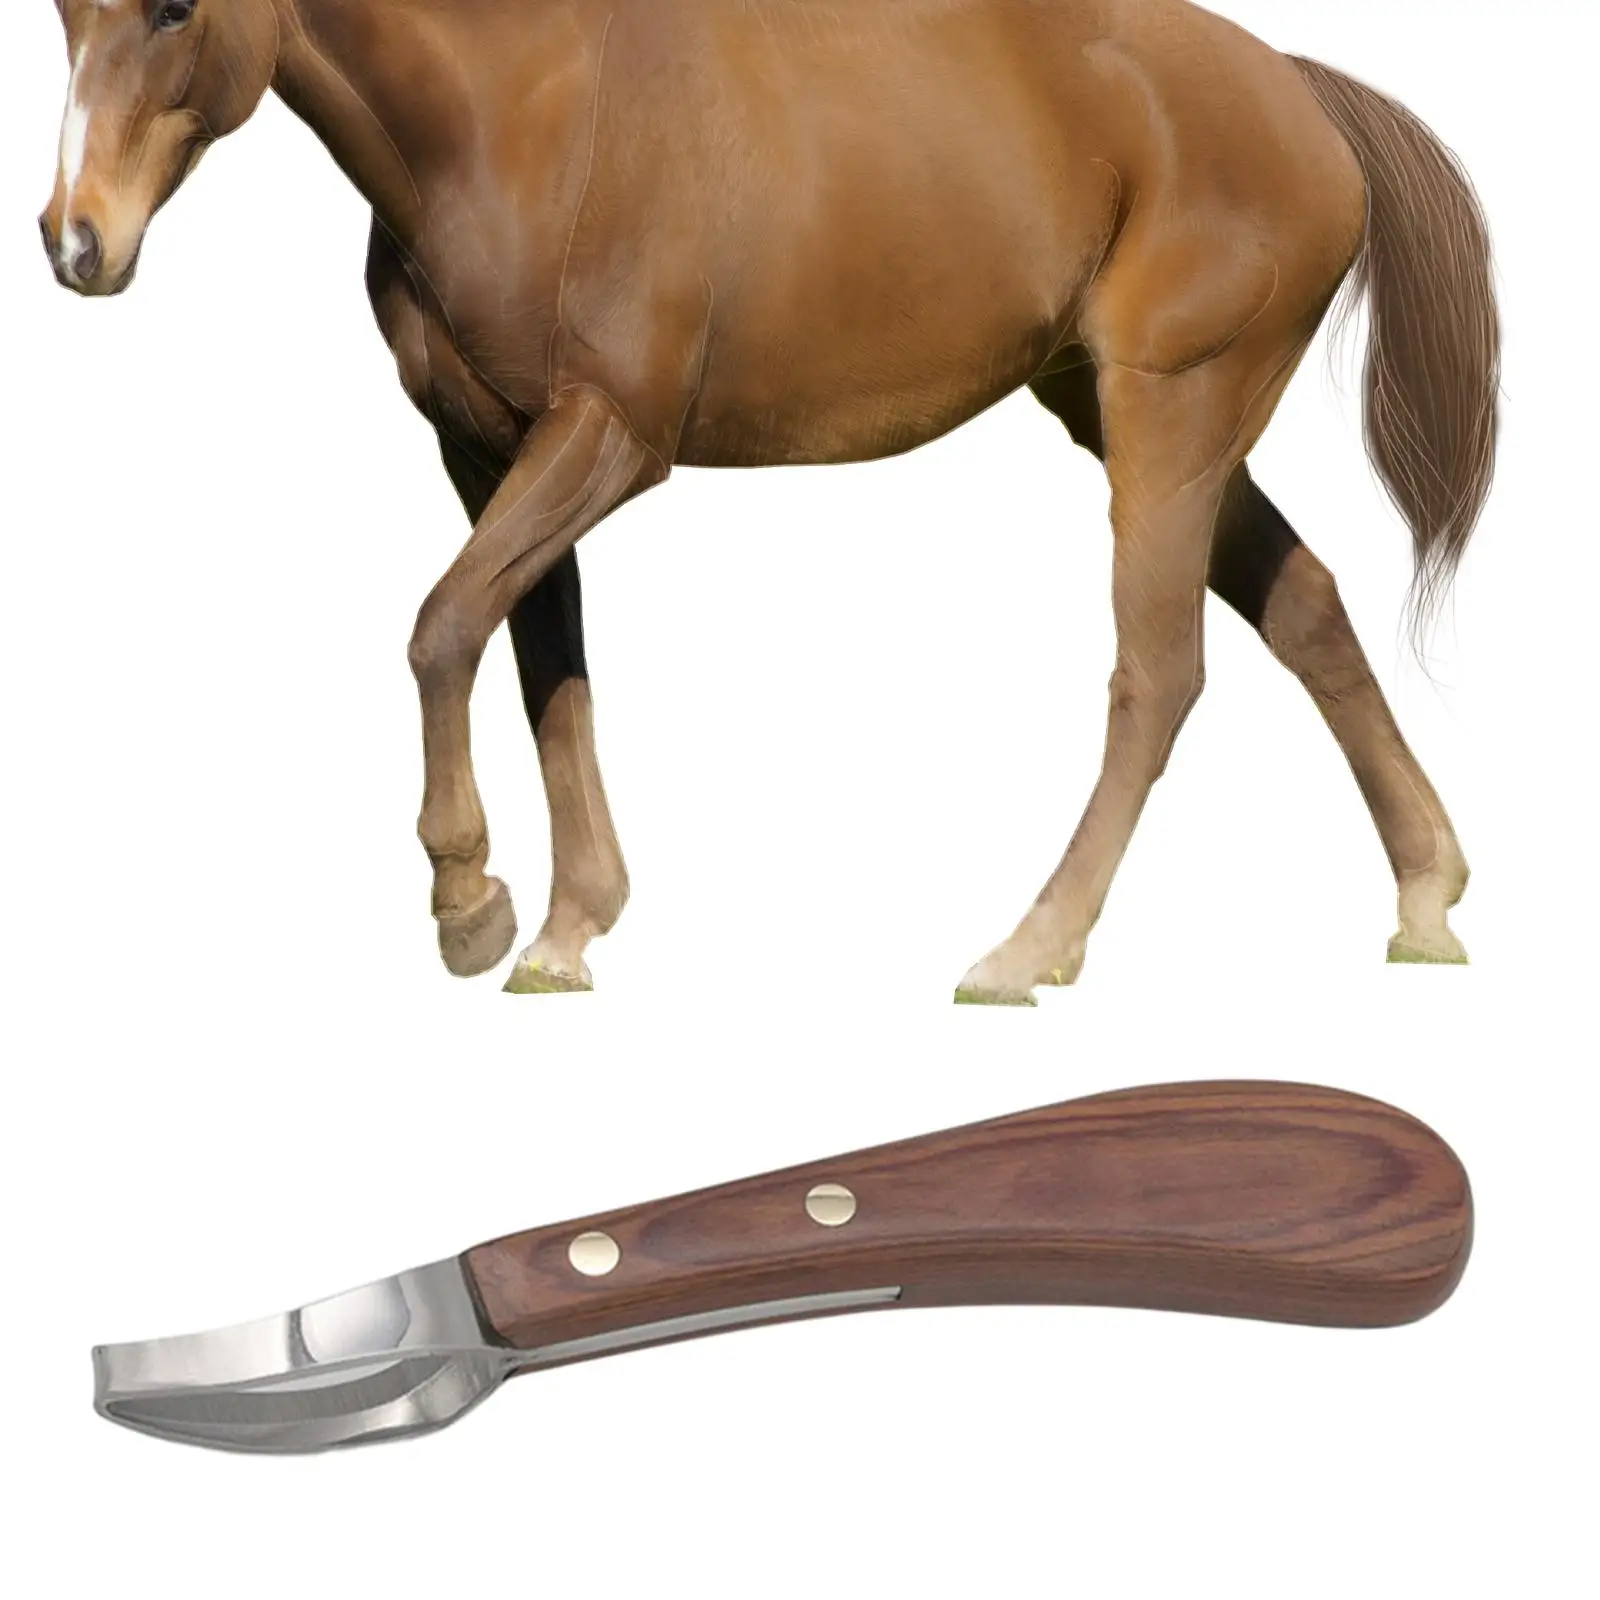 Hoof Knife with Wooden Handle Hoof Cutting Tool for Sheep Animal Cattle